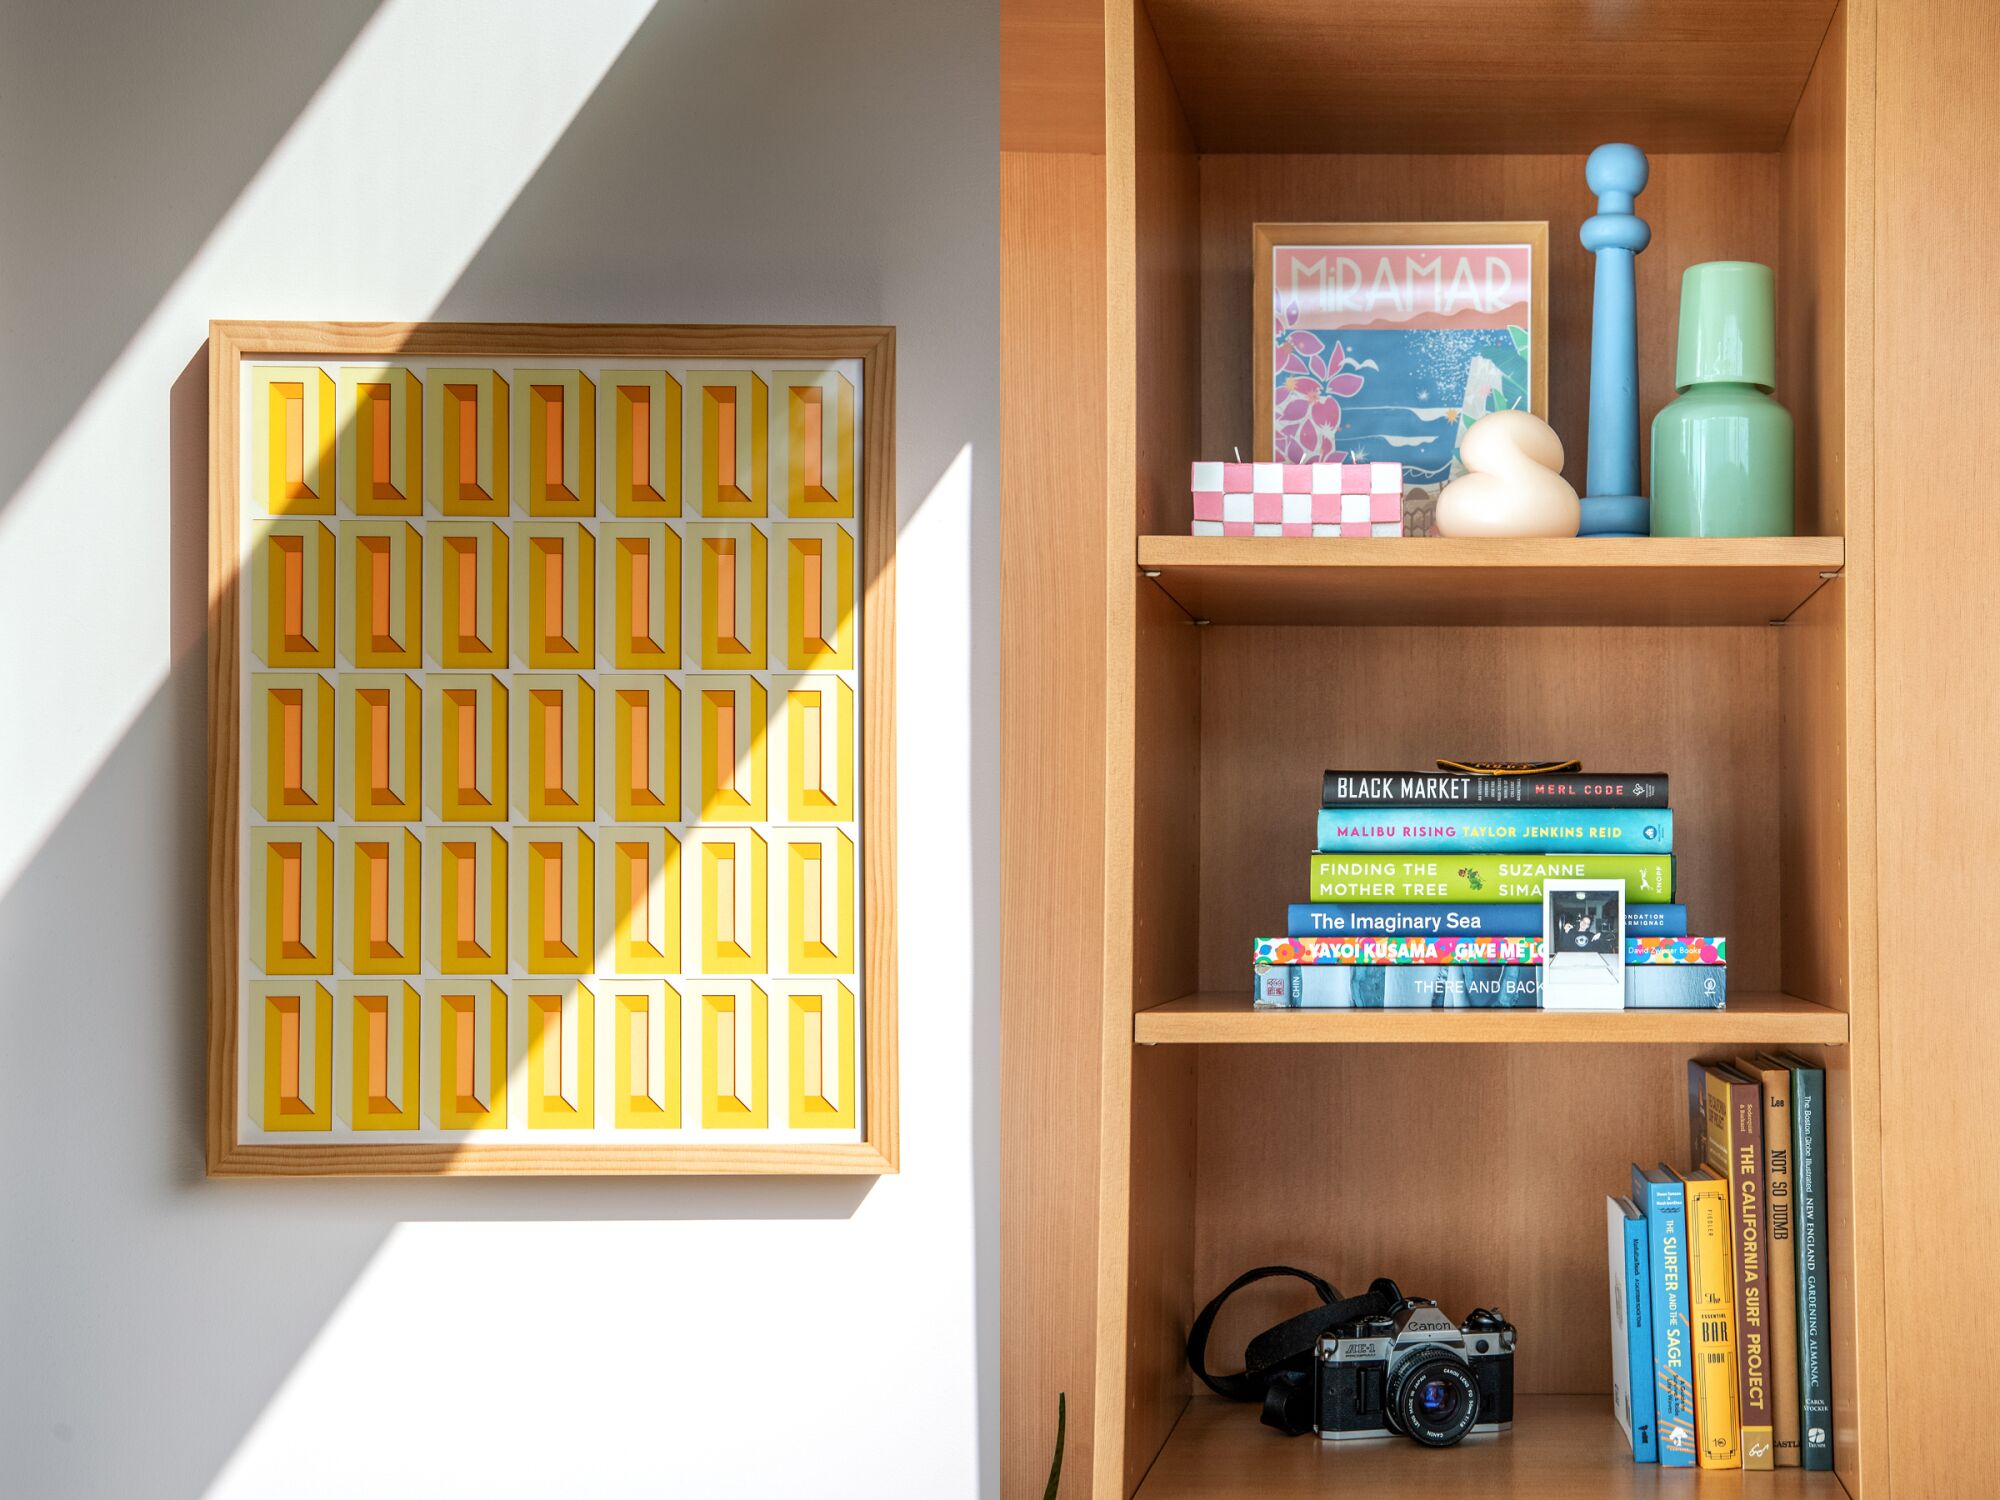 Two photos side by side showing a yellow painting on a wall, left, and books and a camera on a shelf, right.